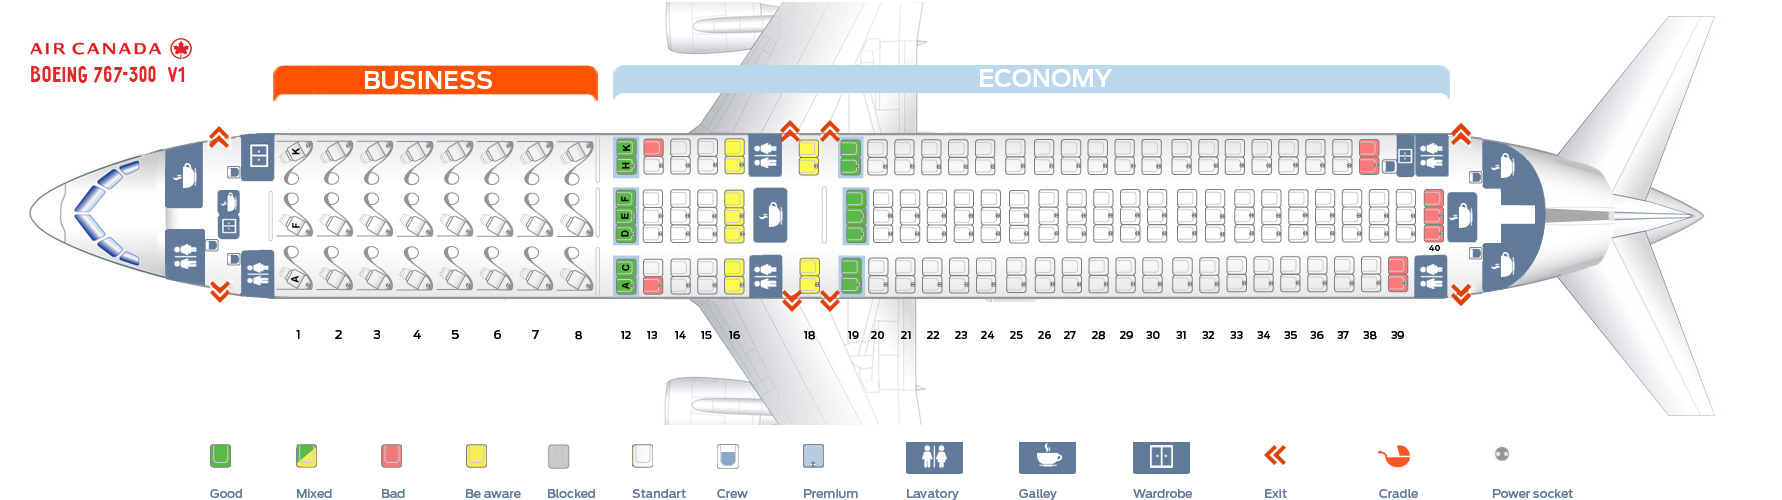 Boeing 767 Seating Chart